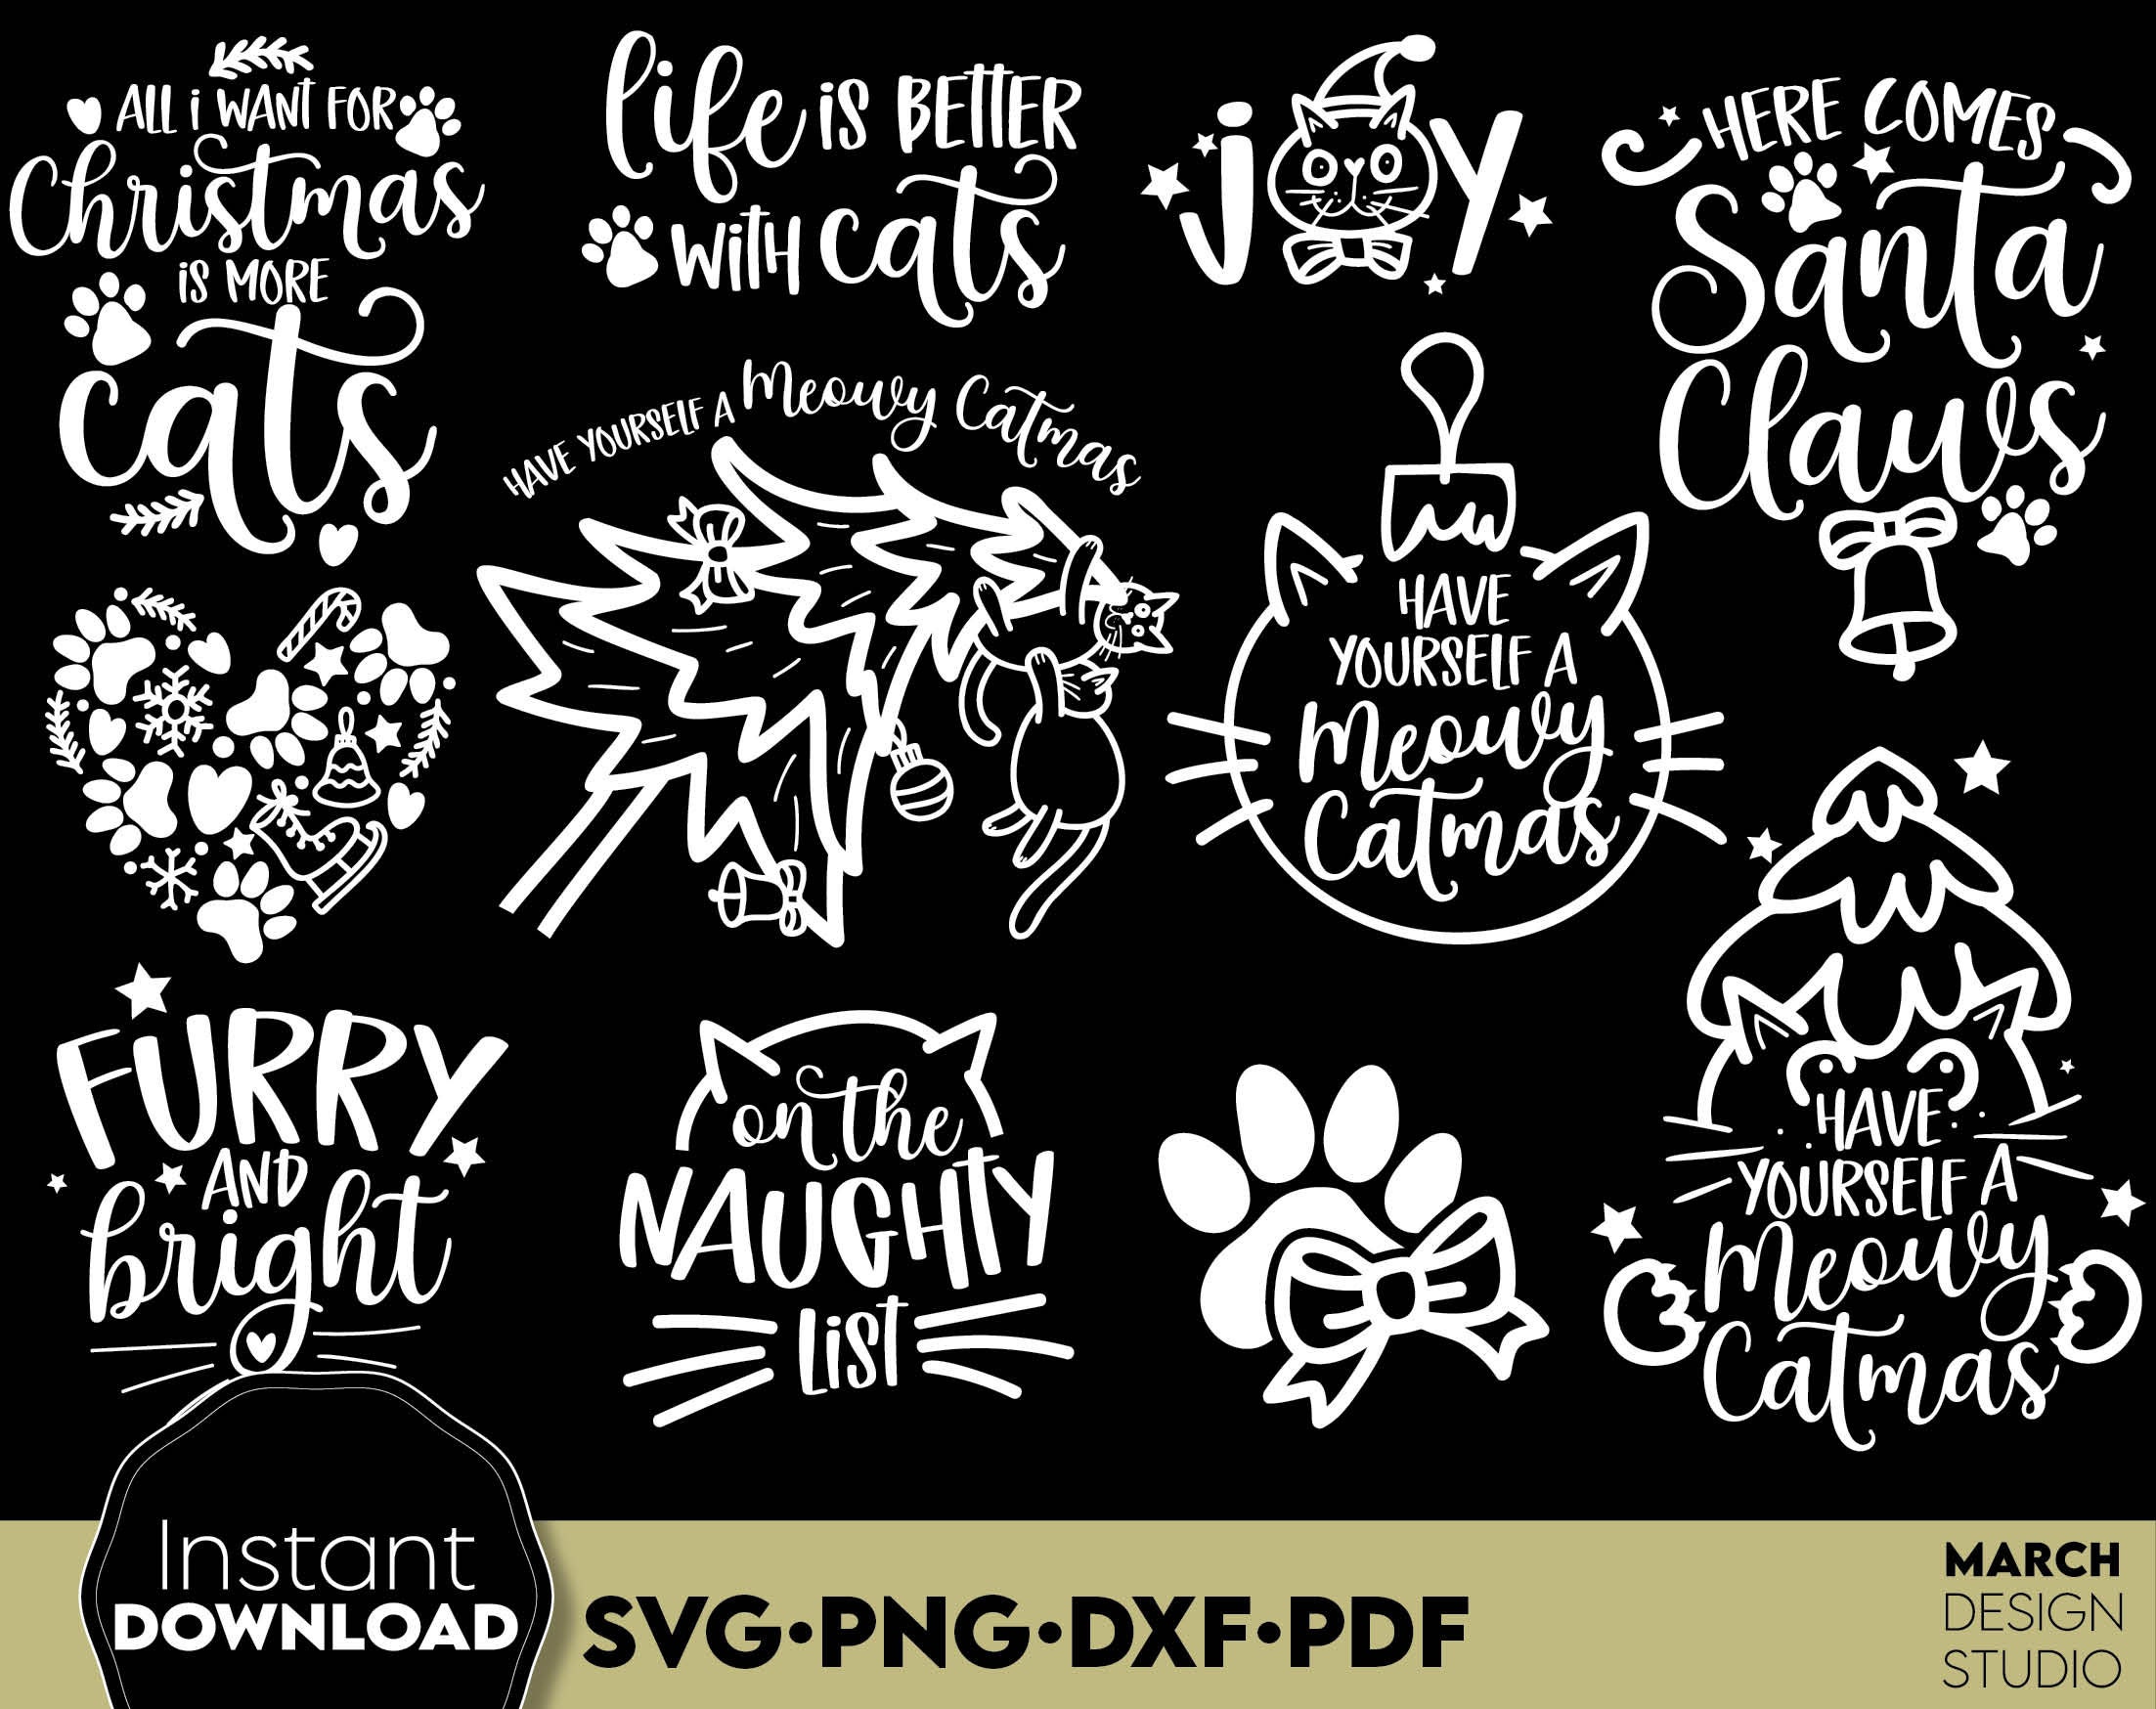 Naughty Dog Logo PNG vector in SVG, PDF, AI, CDR format